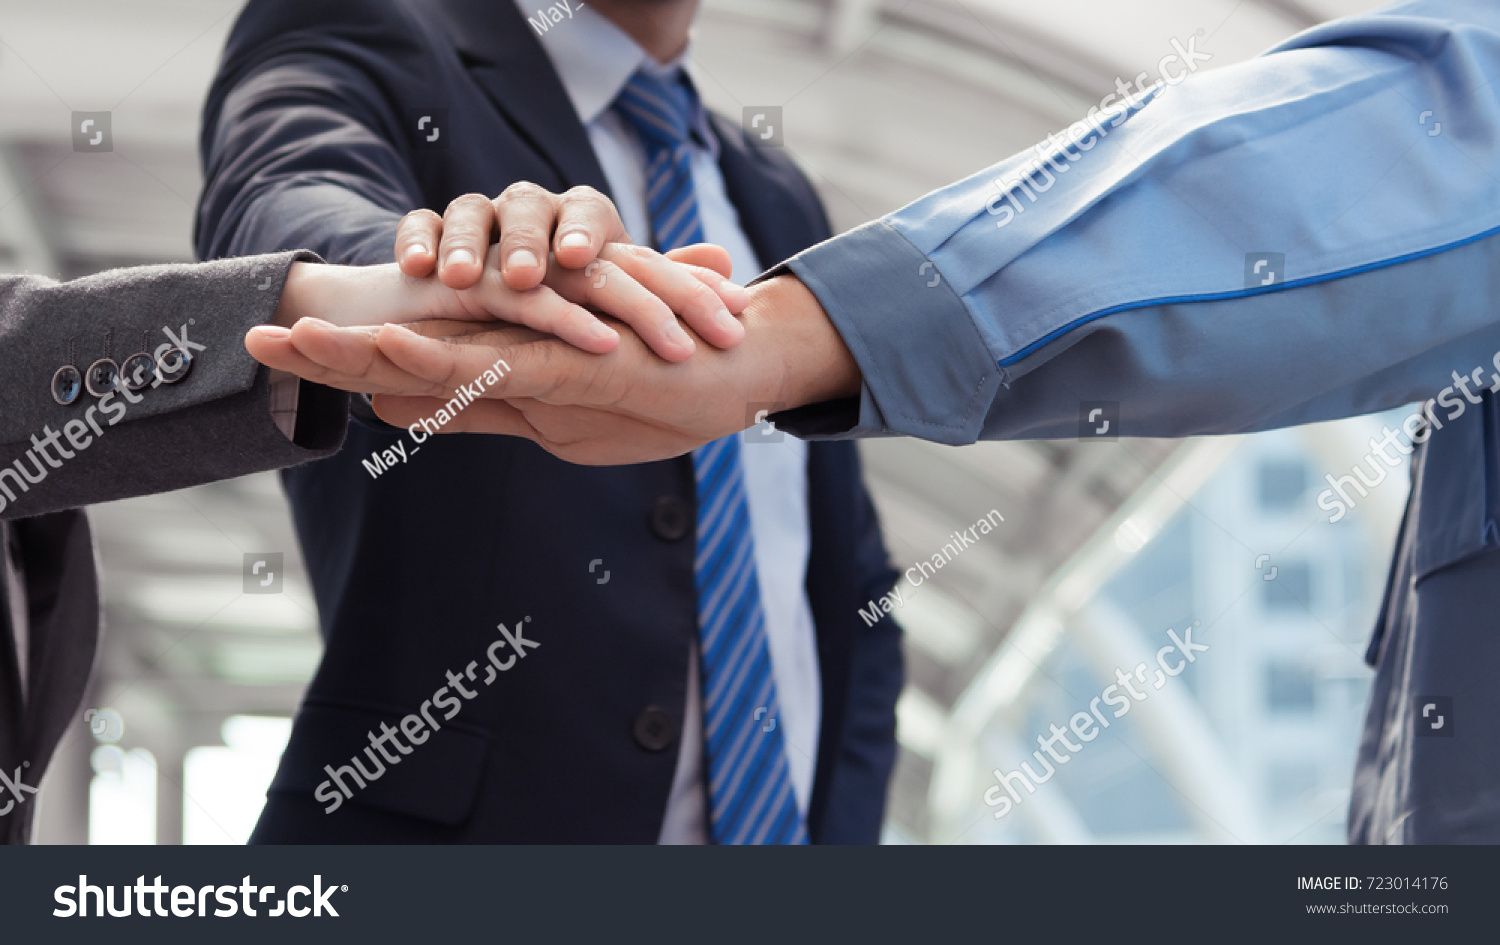 Group of young business people hands with stacking hands together expressing positive thinking, try positive action, teamwork concepts. #723014176